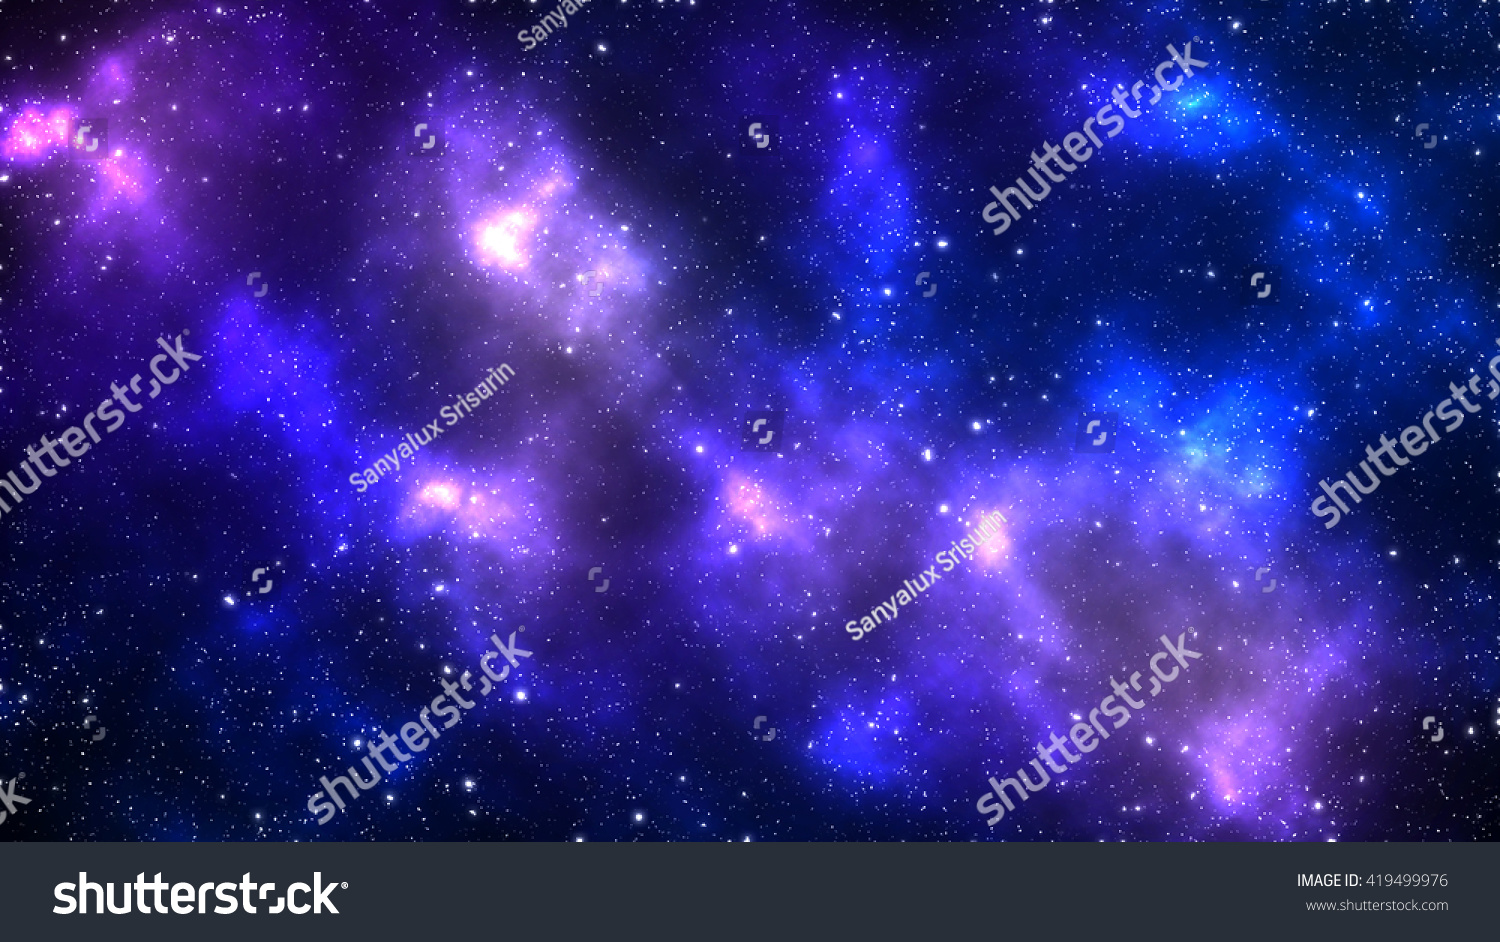 3D rendering Background with galaxy and stars #419499976